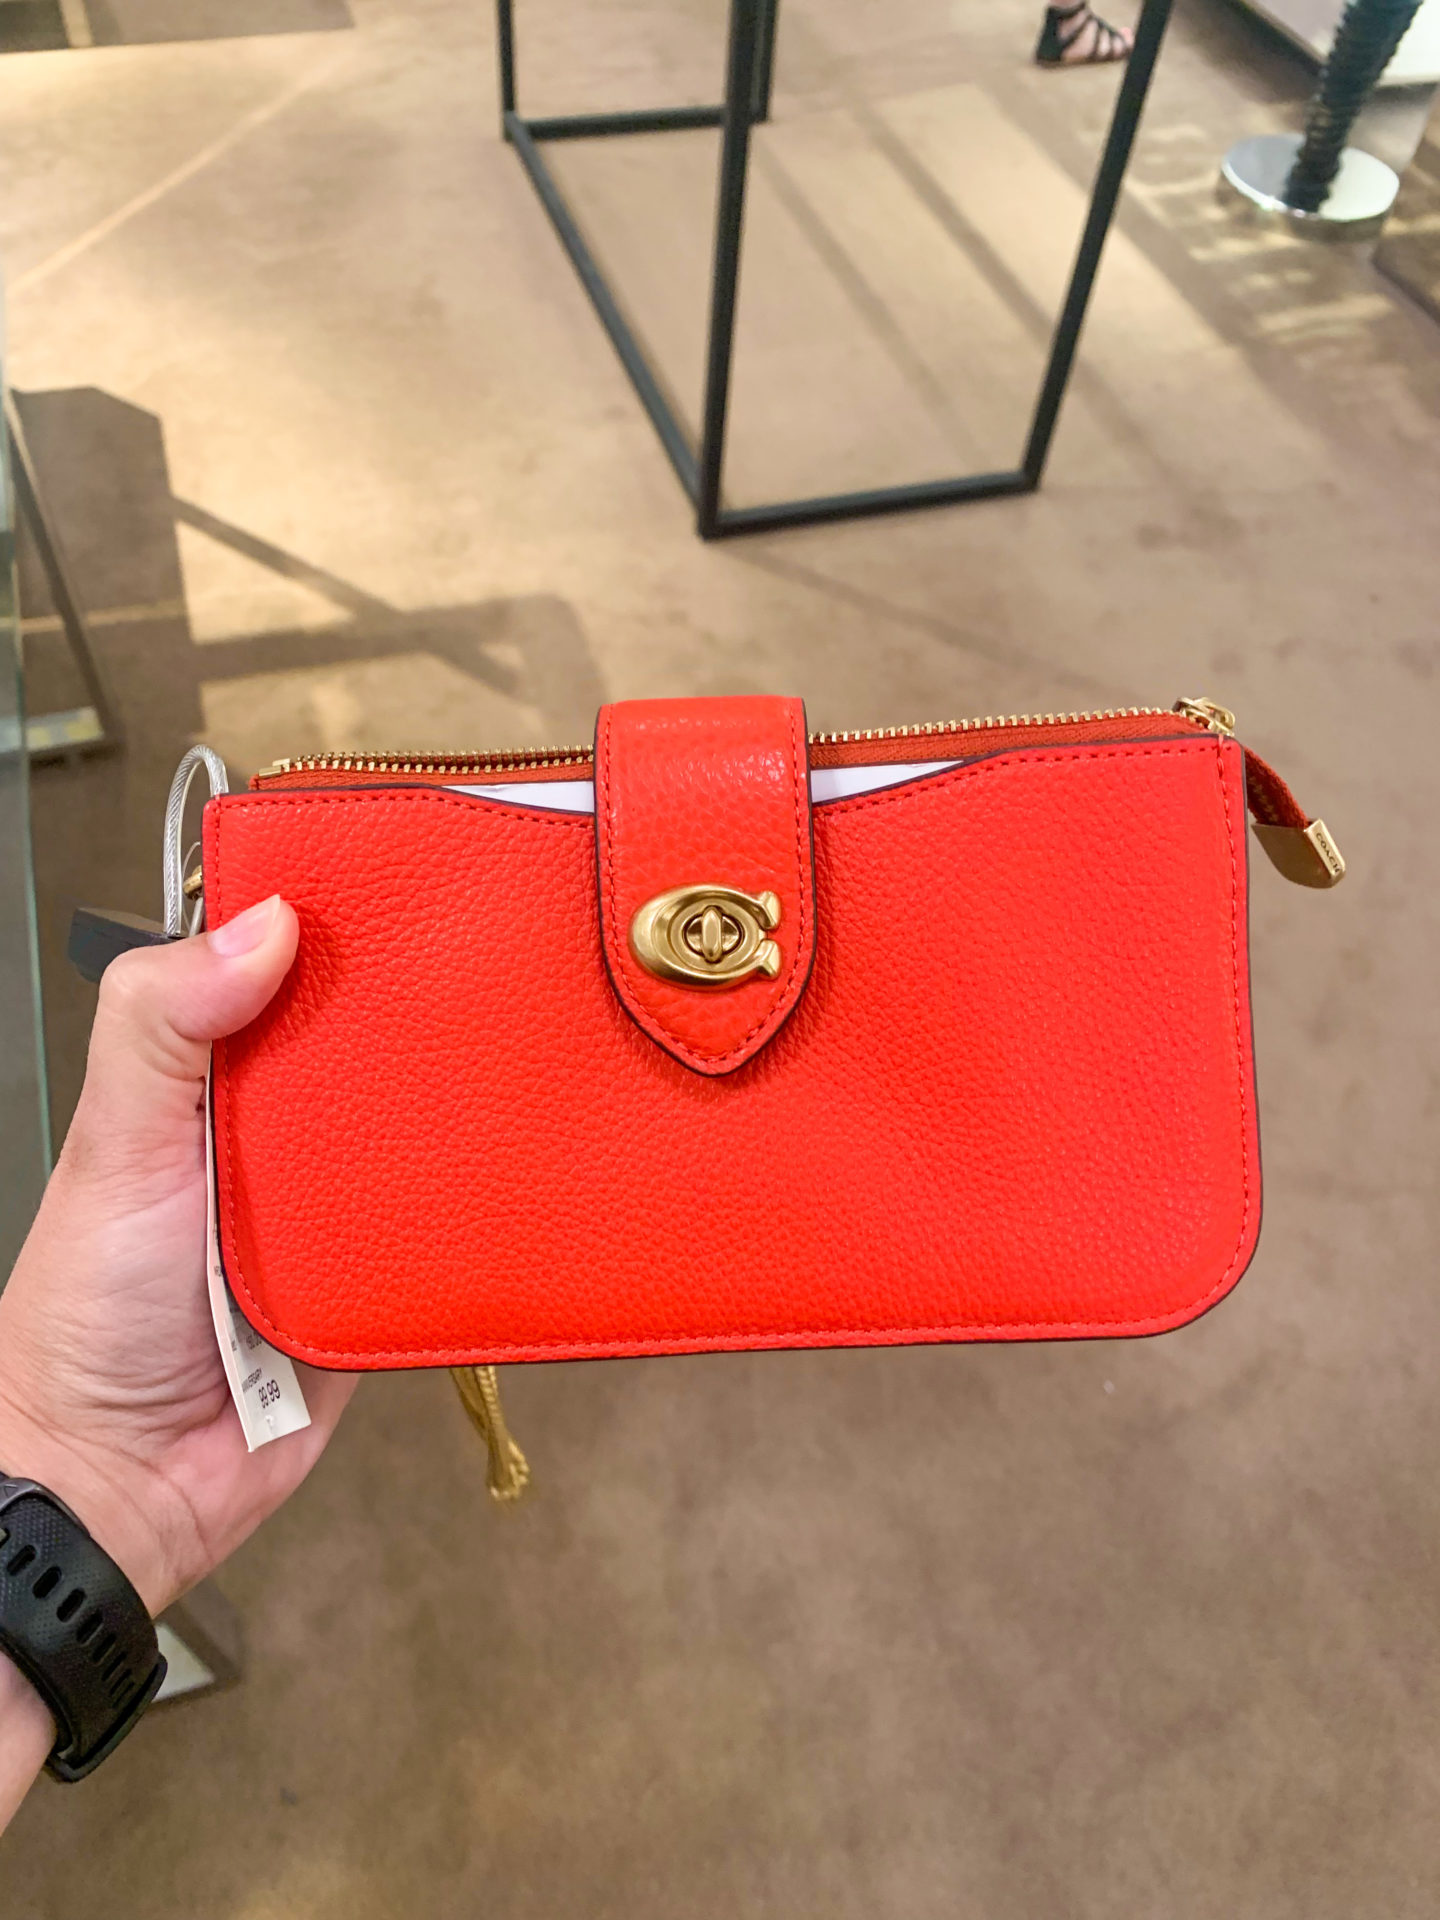 Coach Cassie is back on the Nordstrom anniversary sale : r/handbags